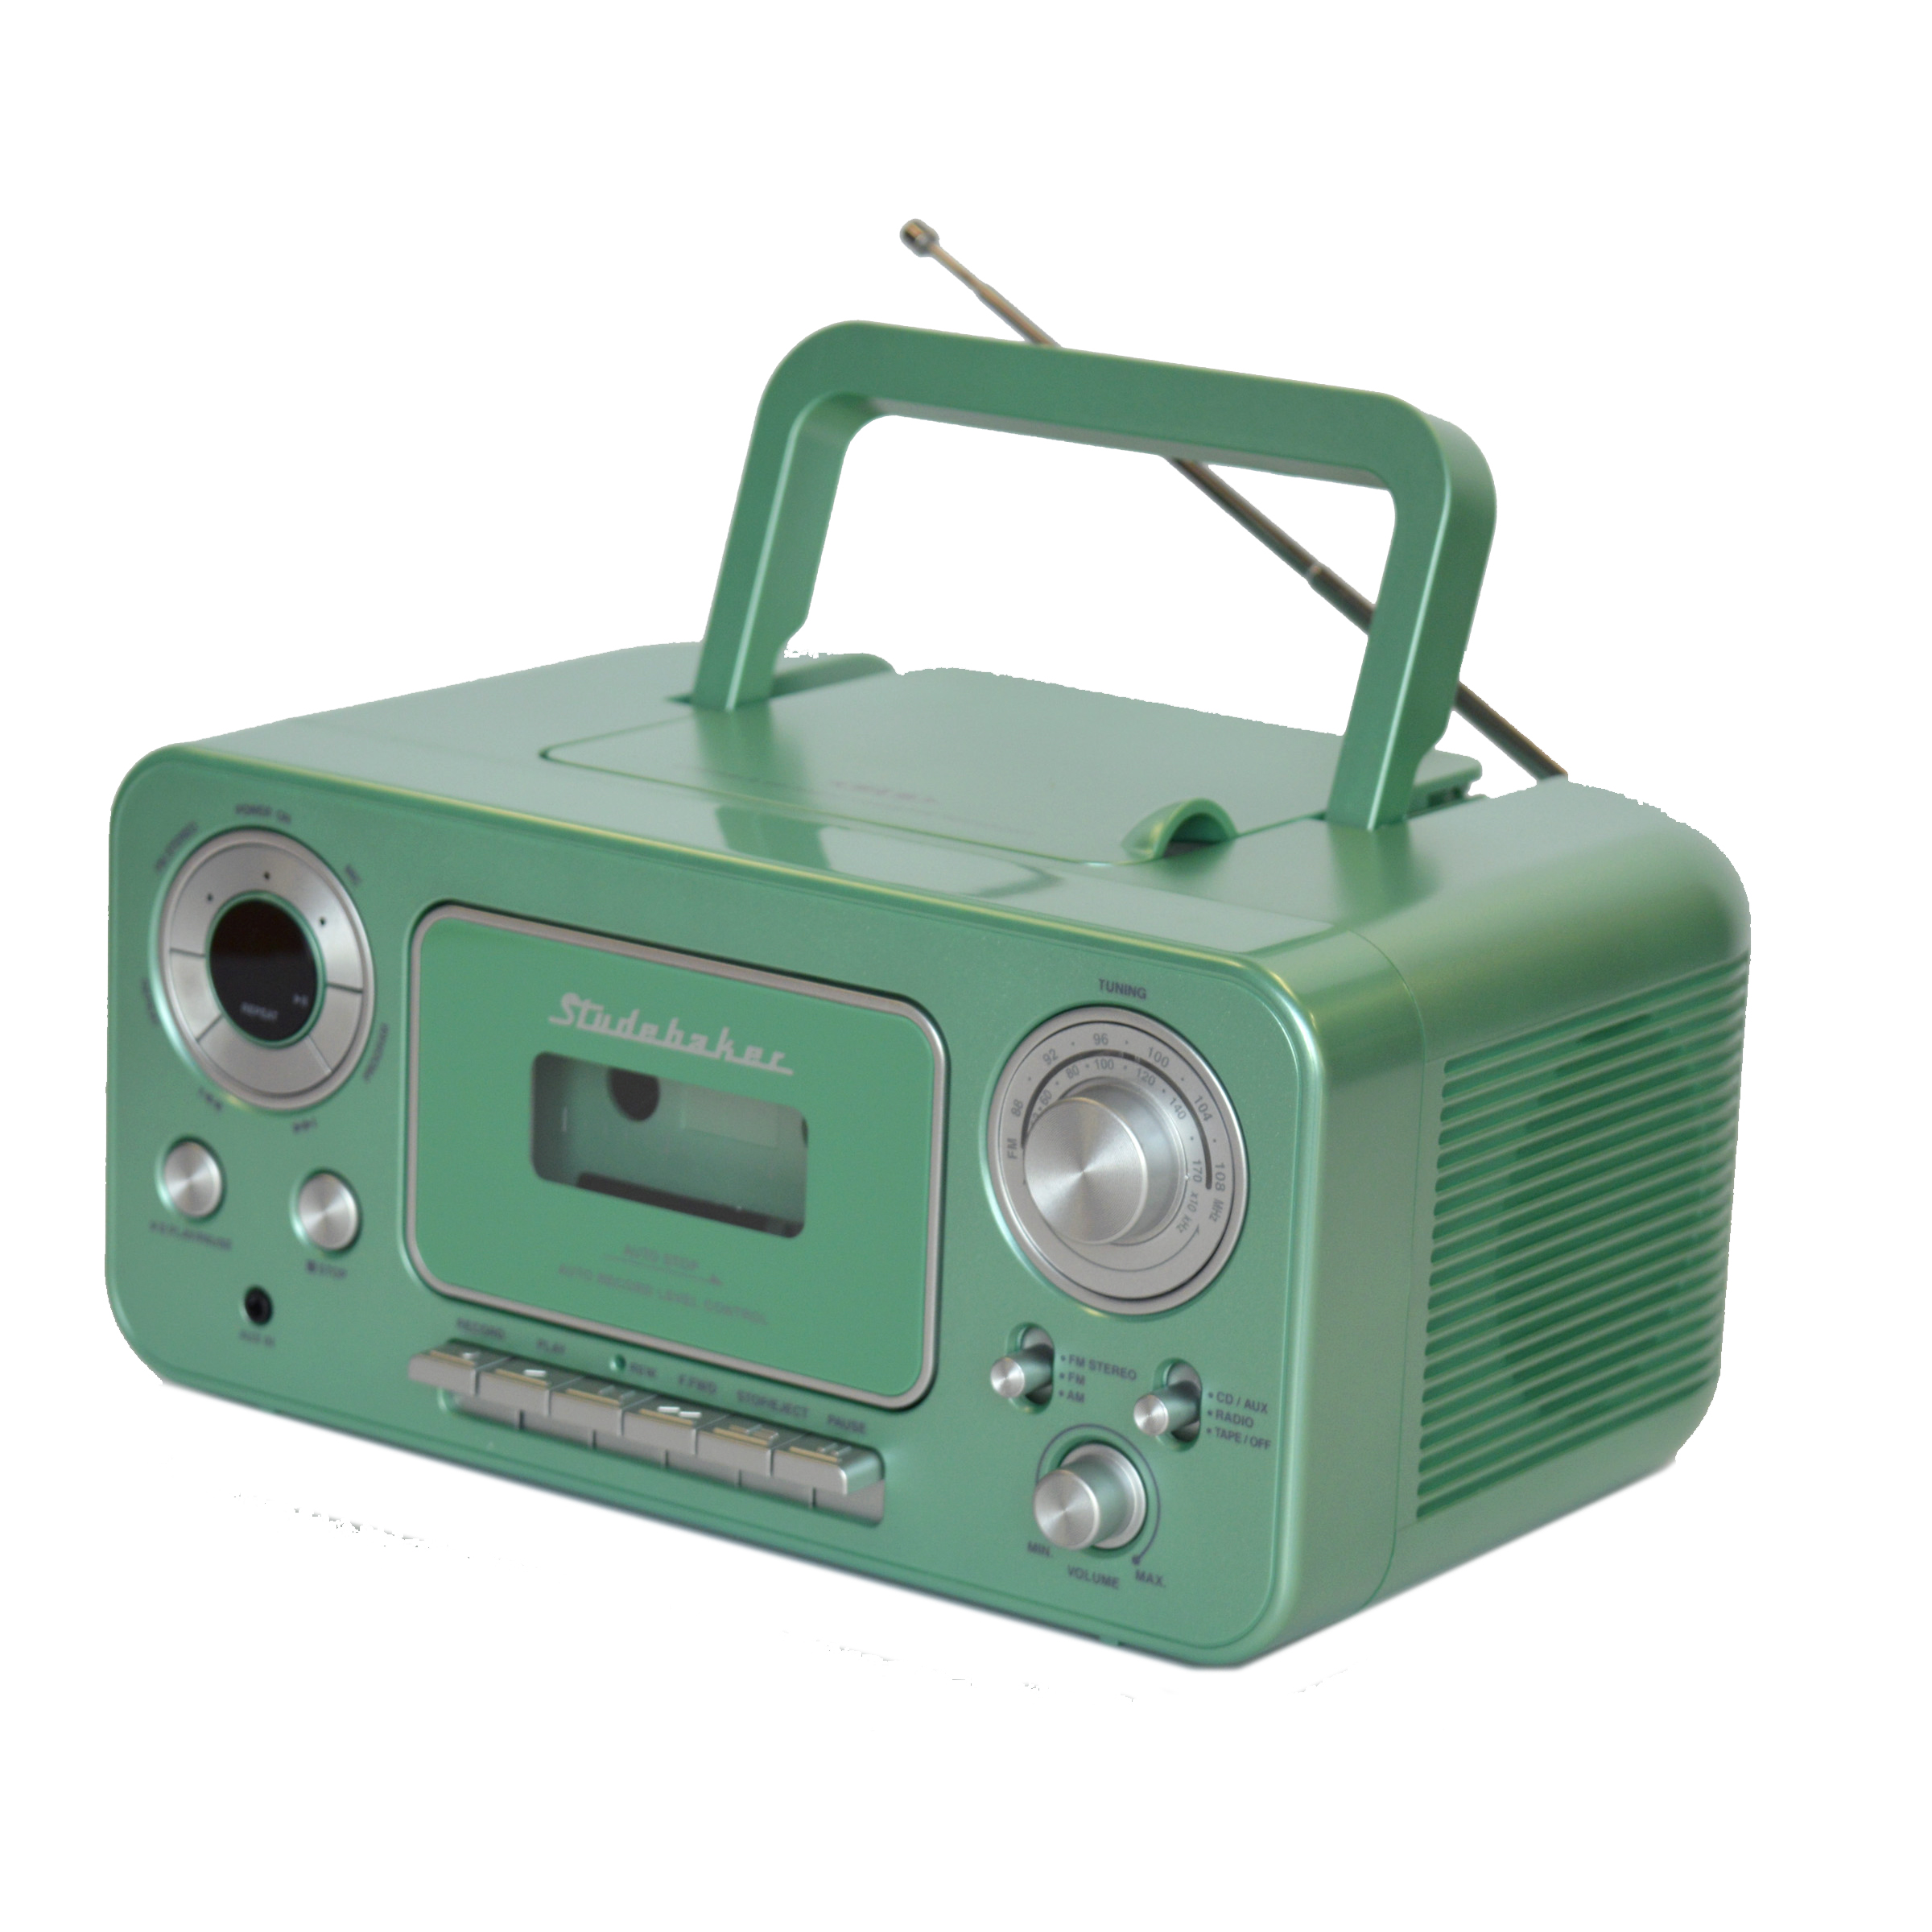 Portable Stereo CD Player with AM/FM Radio and Cassette Player/Recorder - image 1 of 5